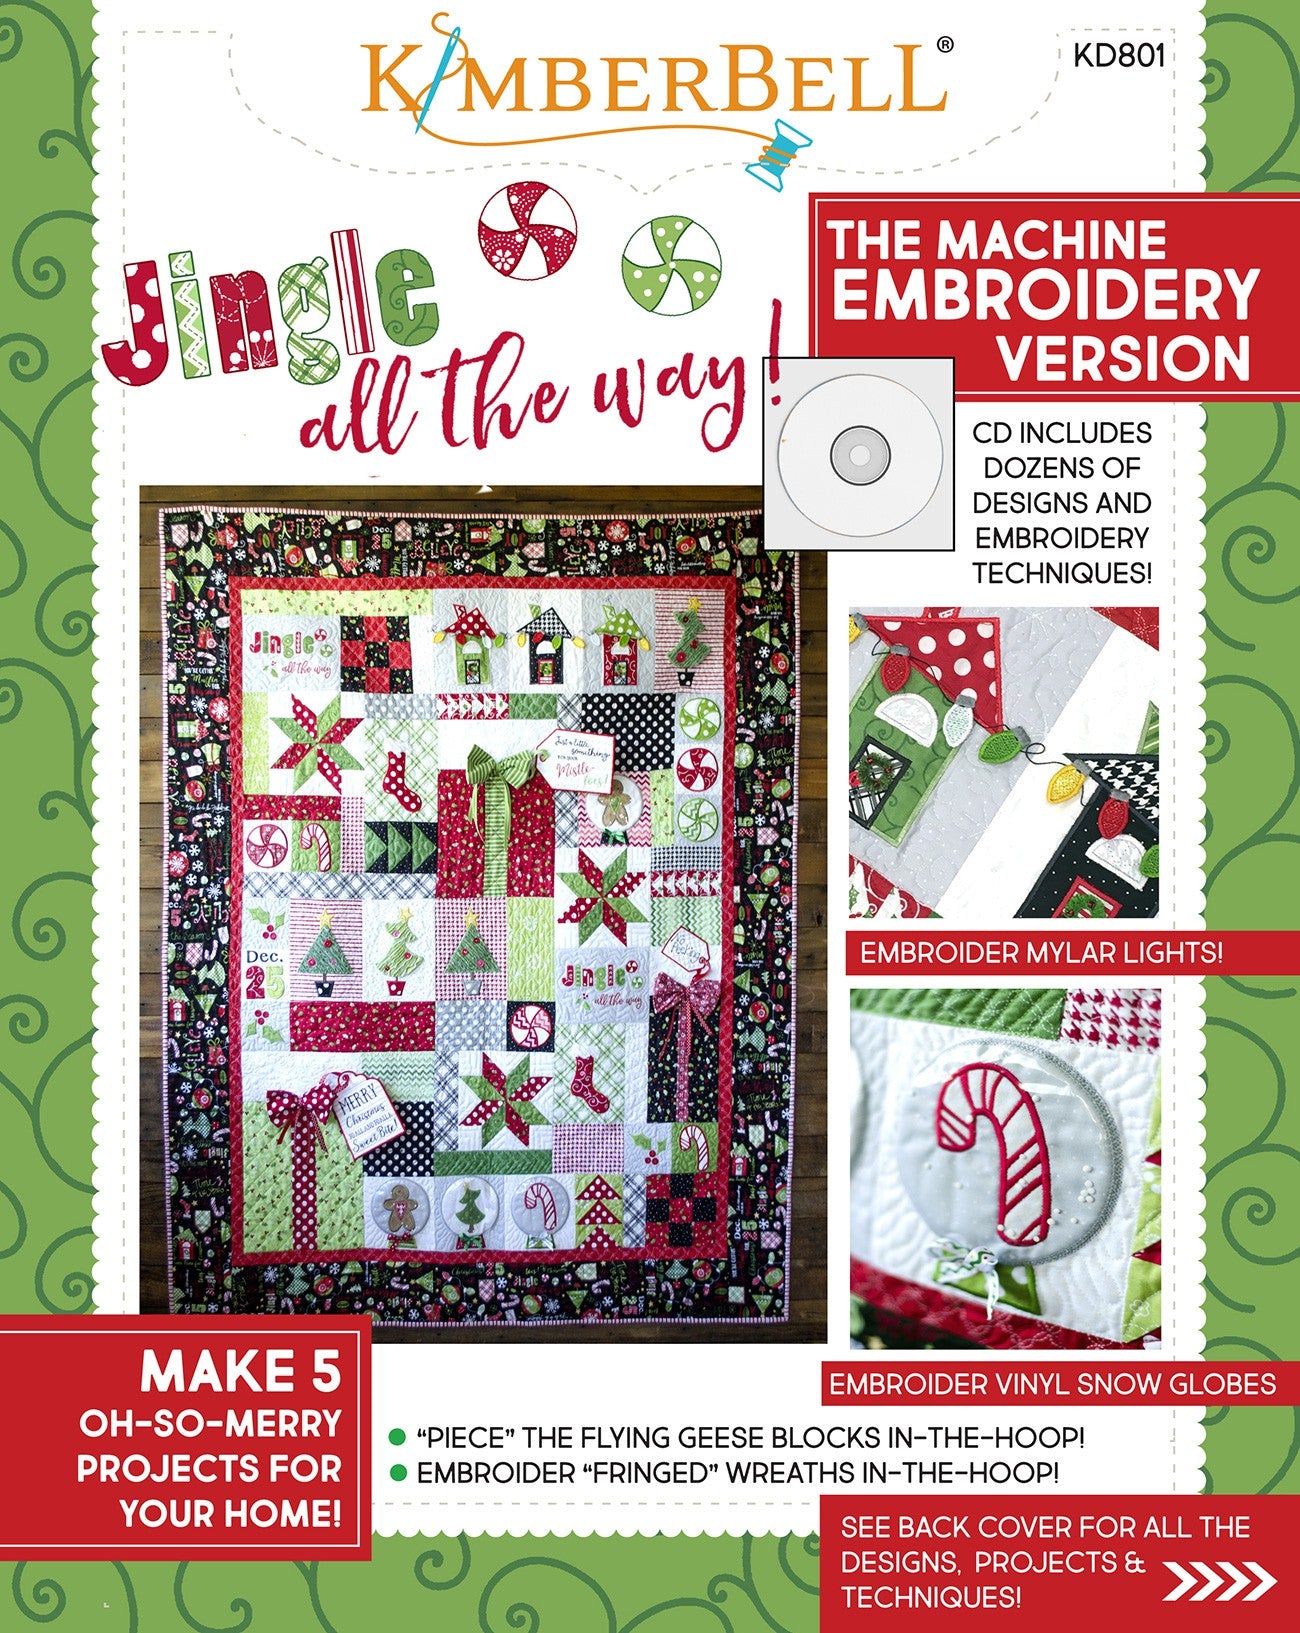 Kimberbell Jingle All the Way (The Machine Embroidery Version) Quilt Pattern Book with CD by Kim Christopherson for Kimberbell